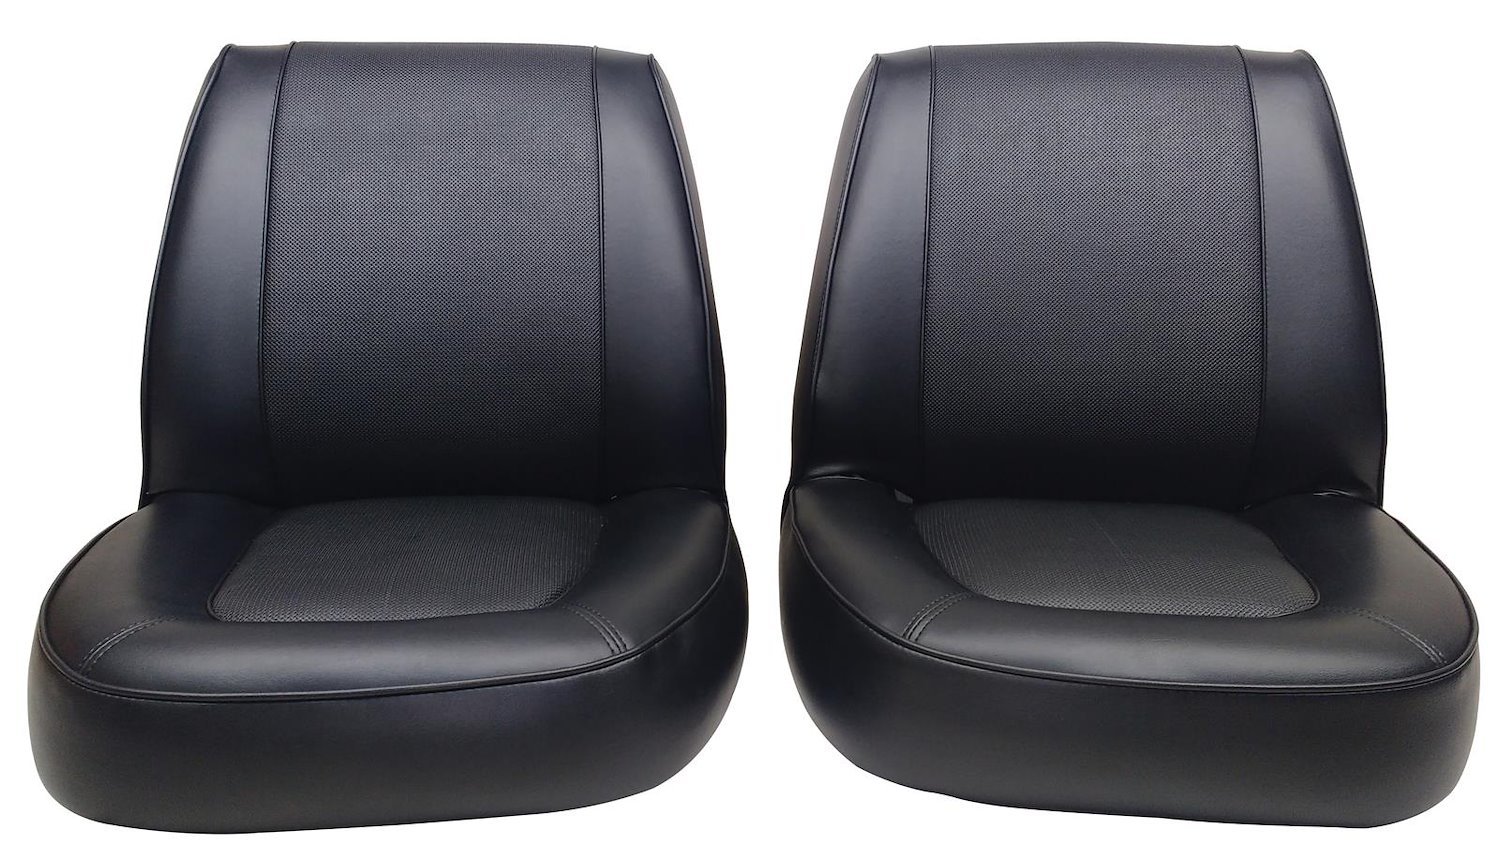 1968 Mercury Cougar Décor Interior Front Bucket Seat Upholstery Set